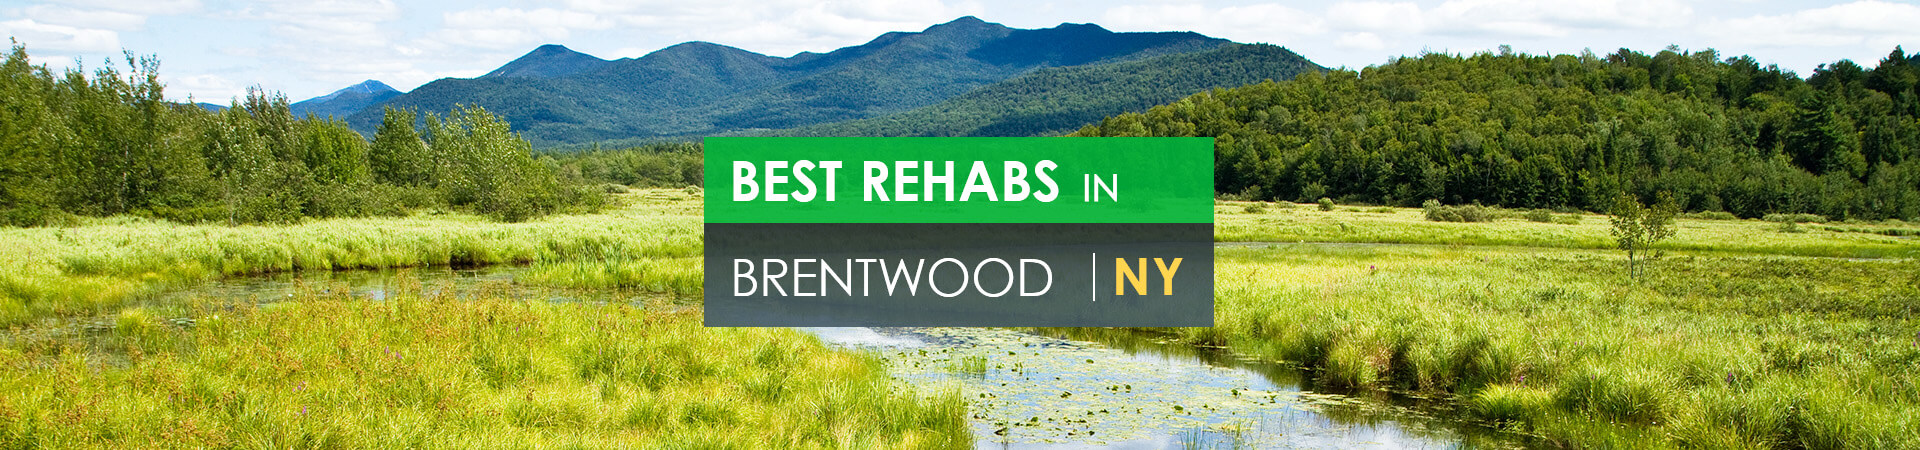 Best rehabs in Brentwood, NY